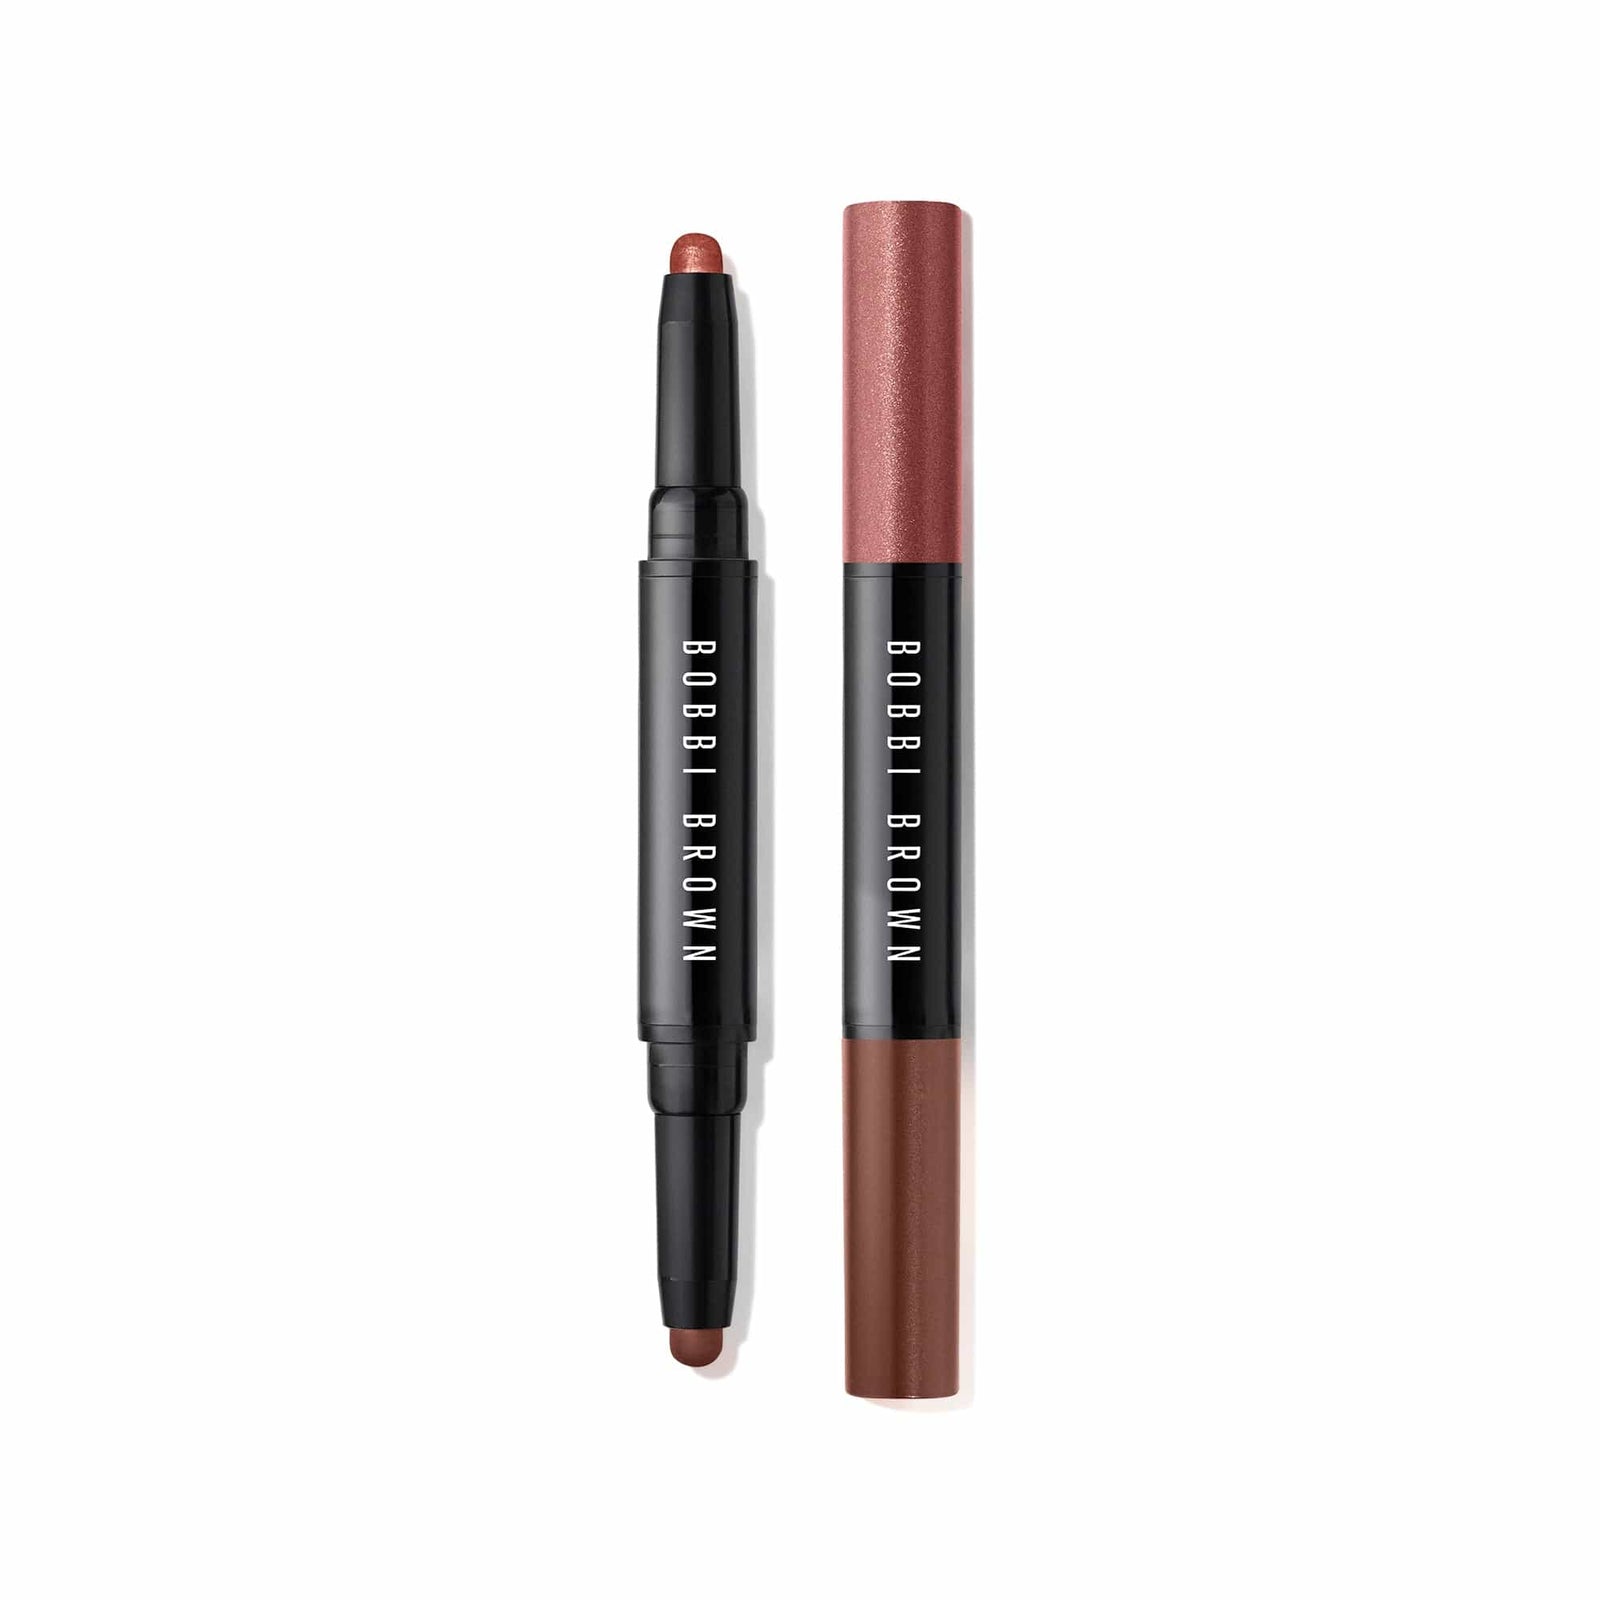 Bobbi Brown Dual-Ended Long-Wear Cream Shadow Stick in Rusted Pink/Cinnamon